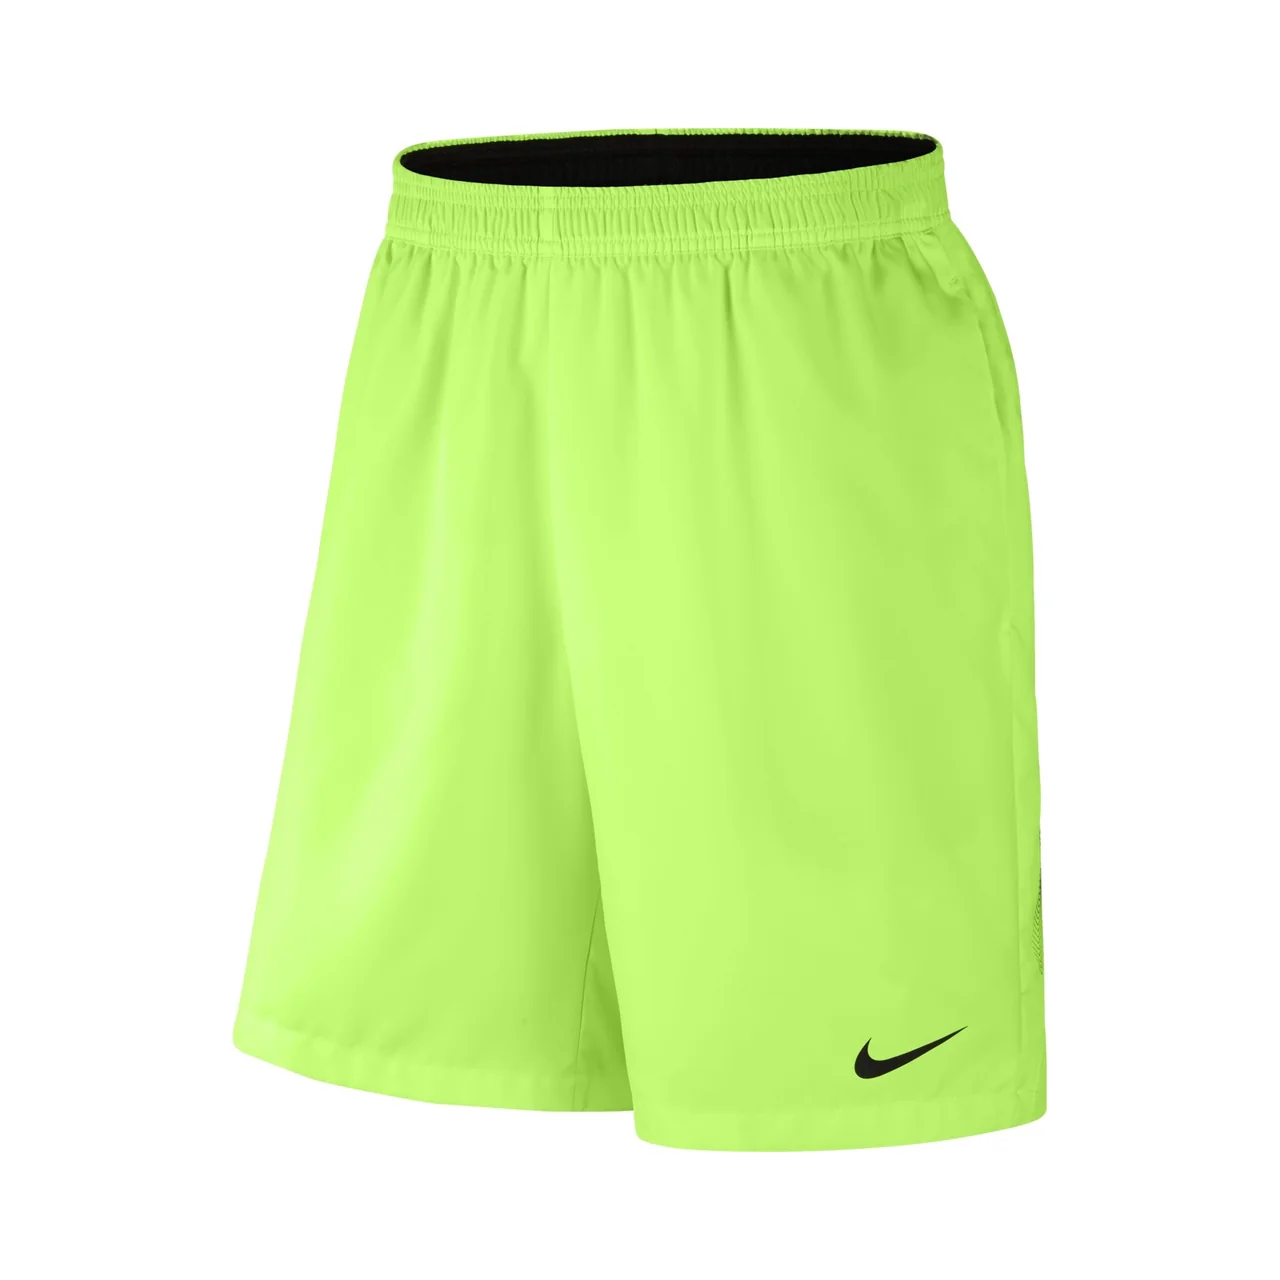 Nike Dry 9'' Shorts Green Size S